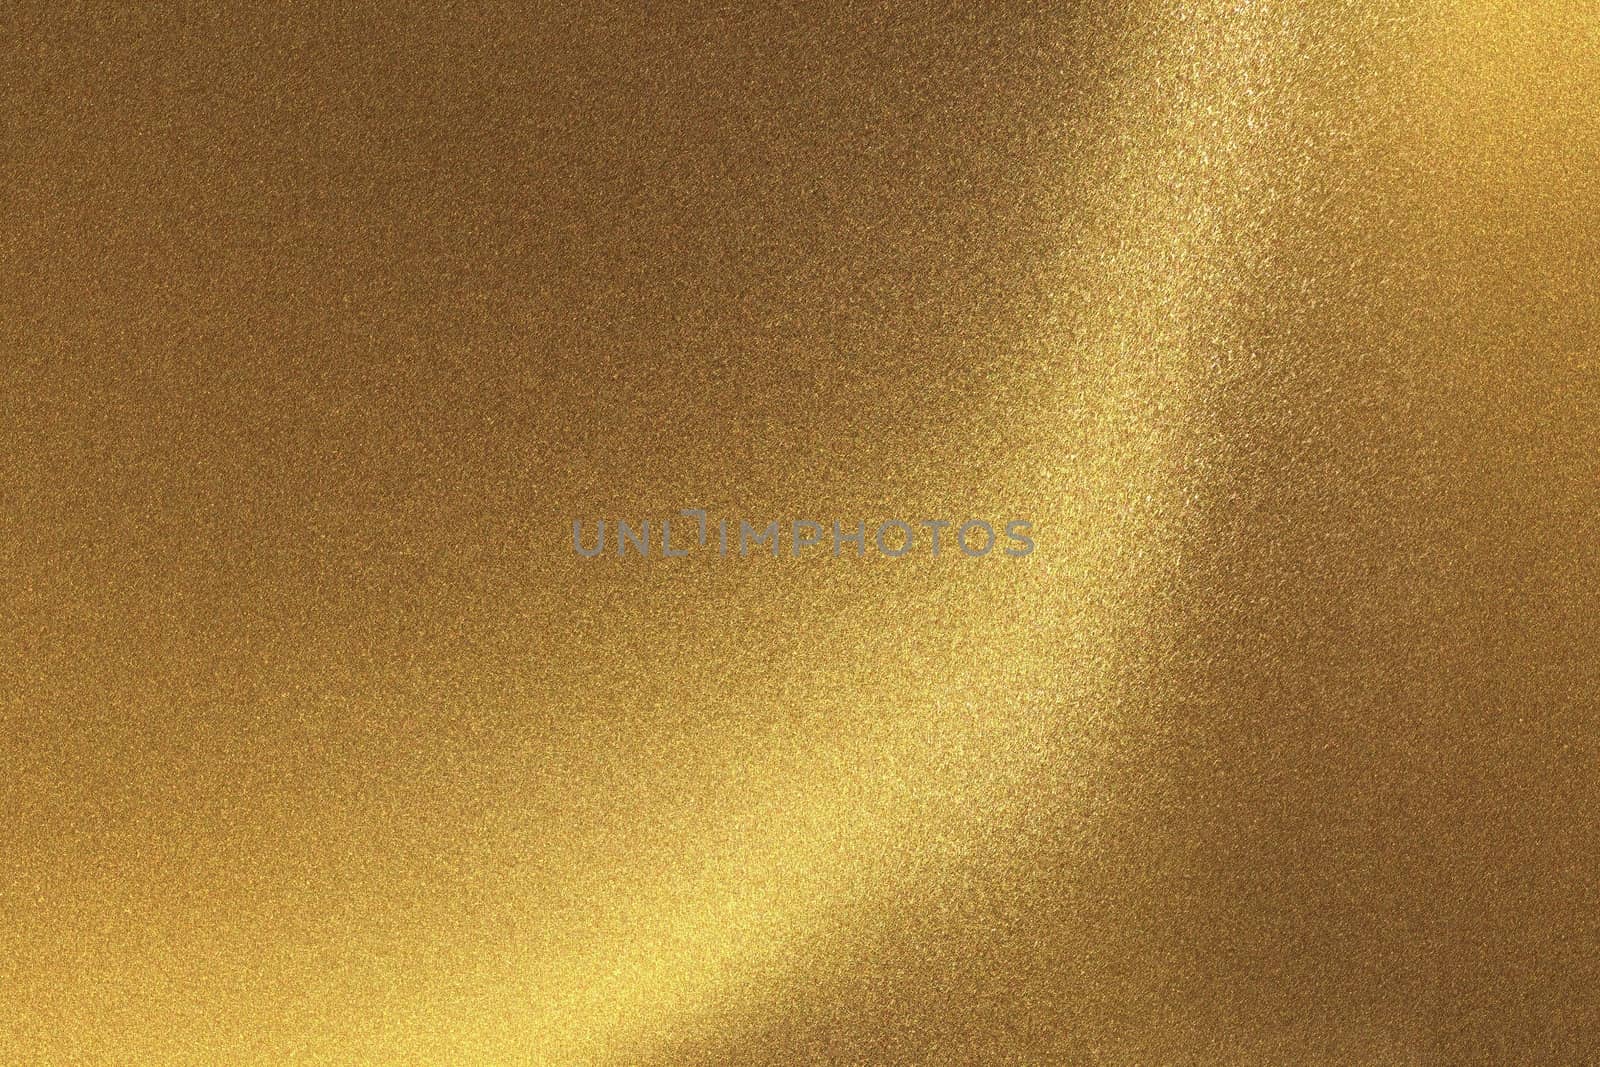 Abstract texture background, shiny scratches golden foil metal wall